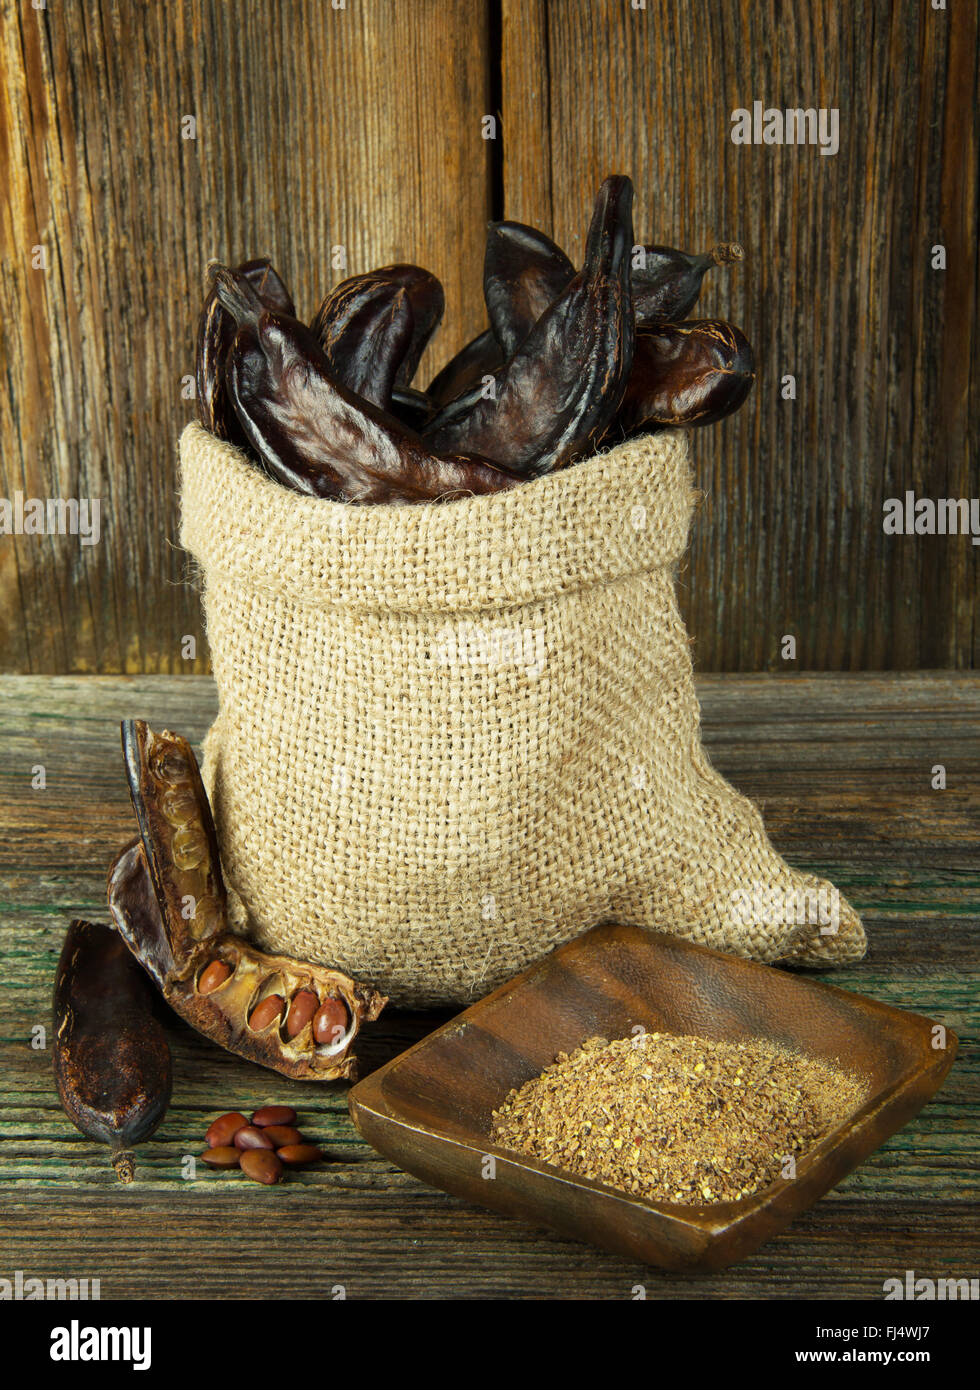 Carob pods in linen bag on wooden background Stock Photo